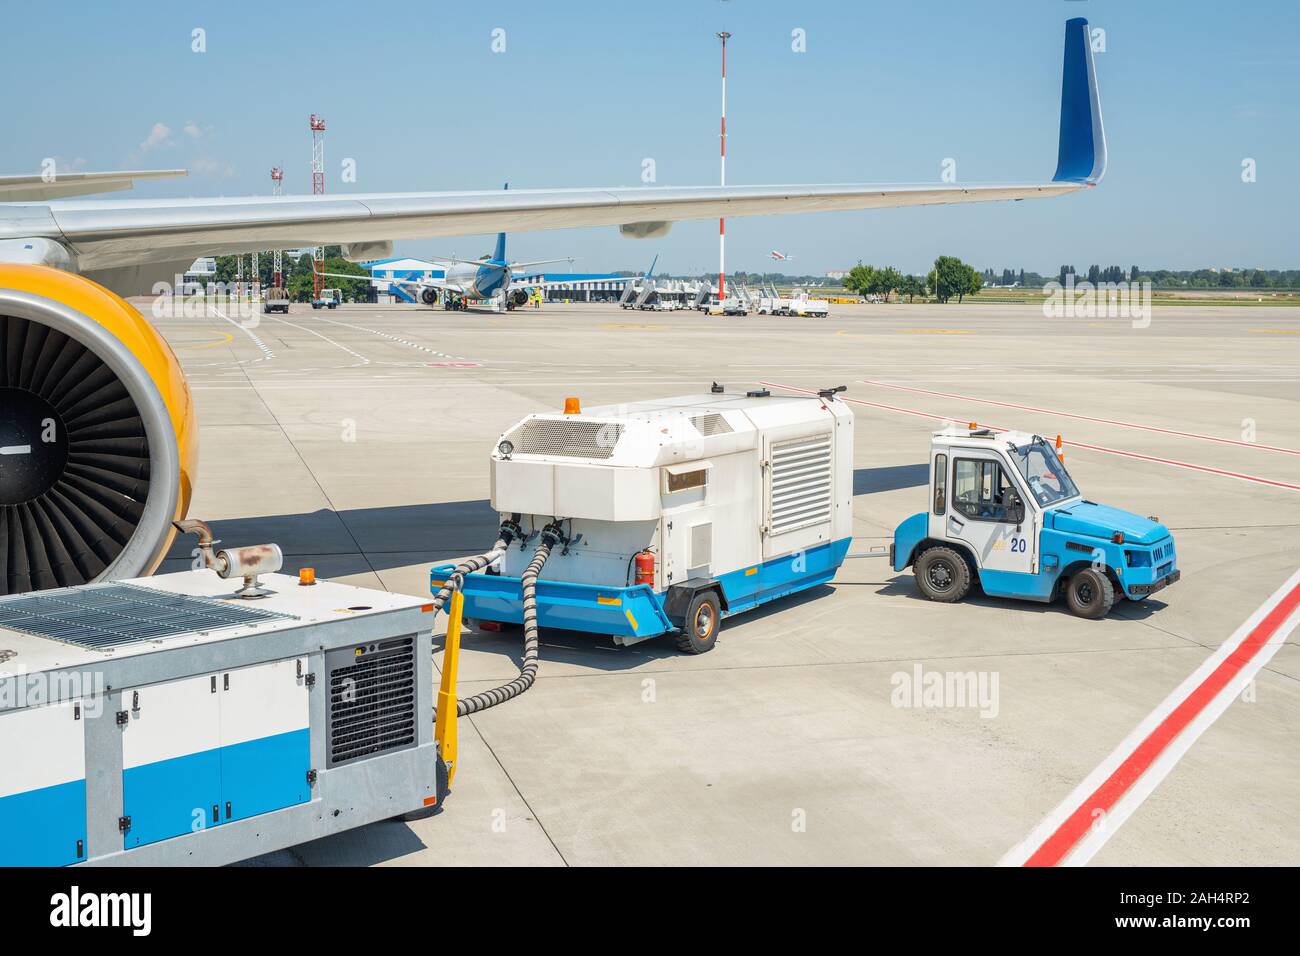 Big modern commercial plane parked on airport runway and connected to ground supply power unit. Aircraft maintenance service and check-up before Stock Photo